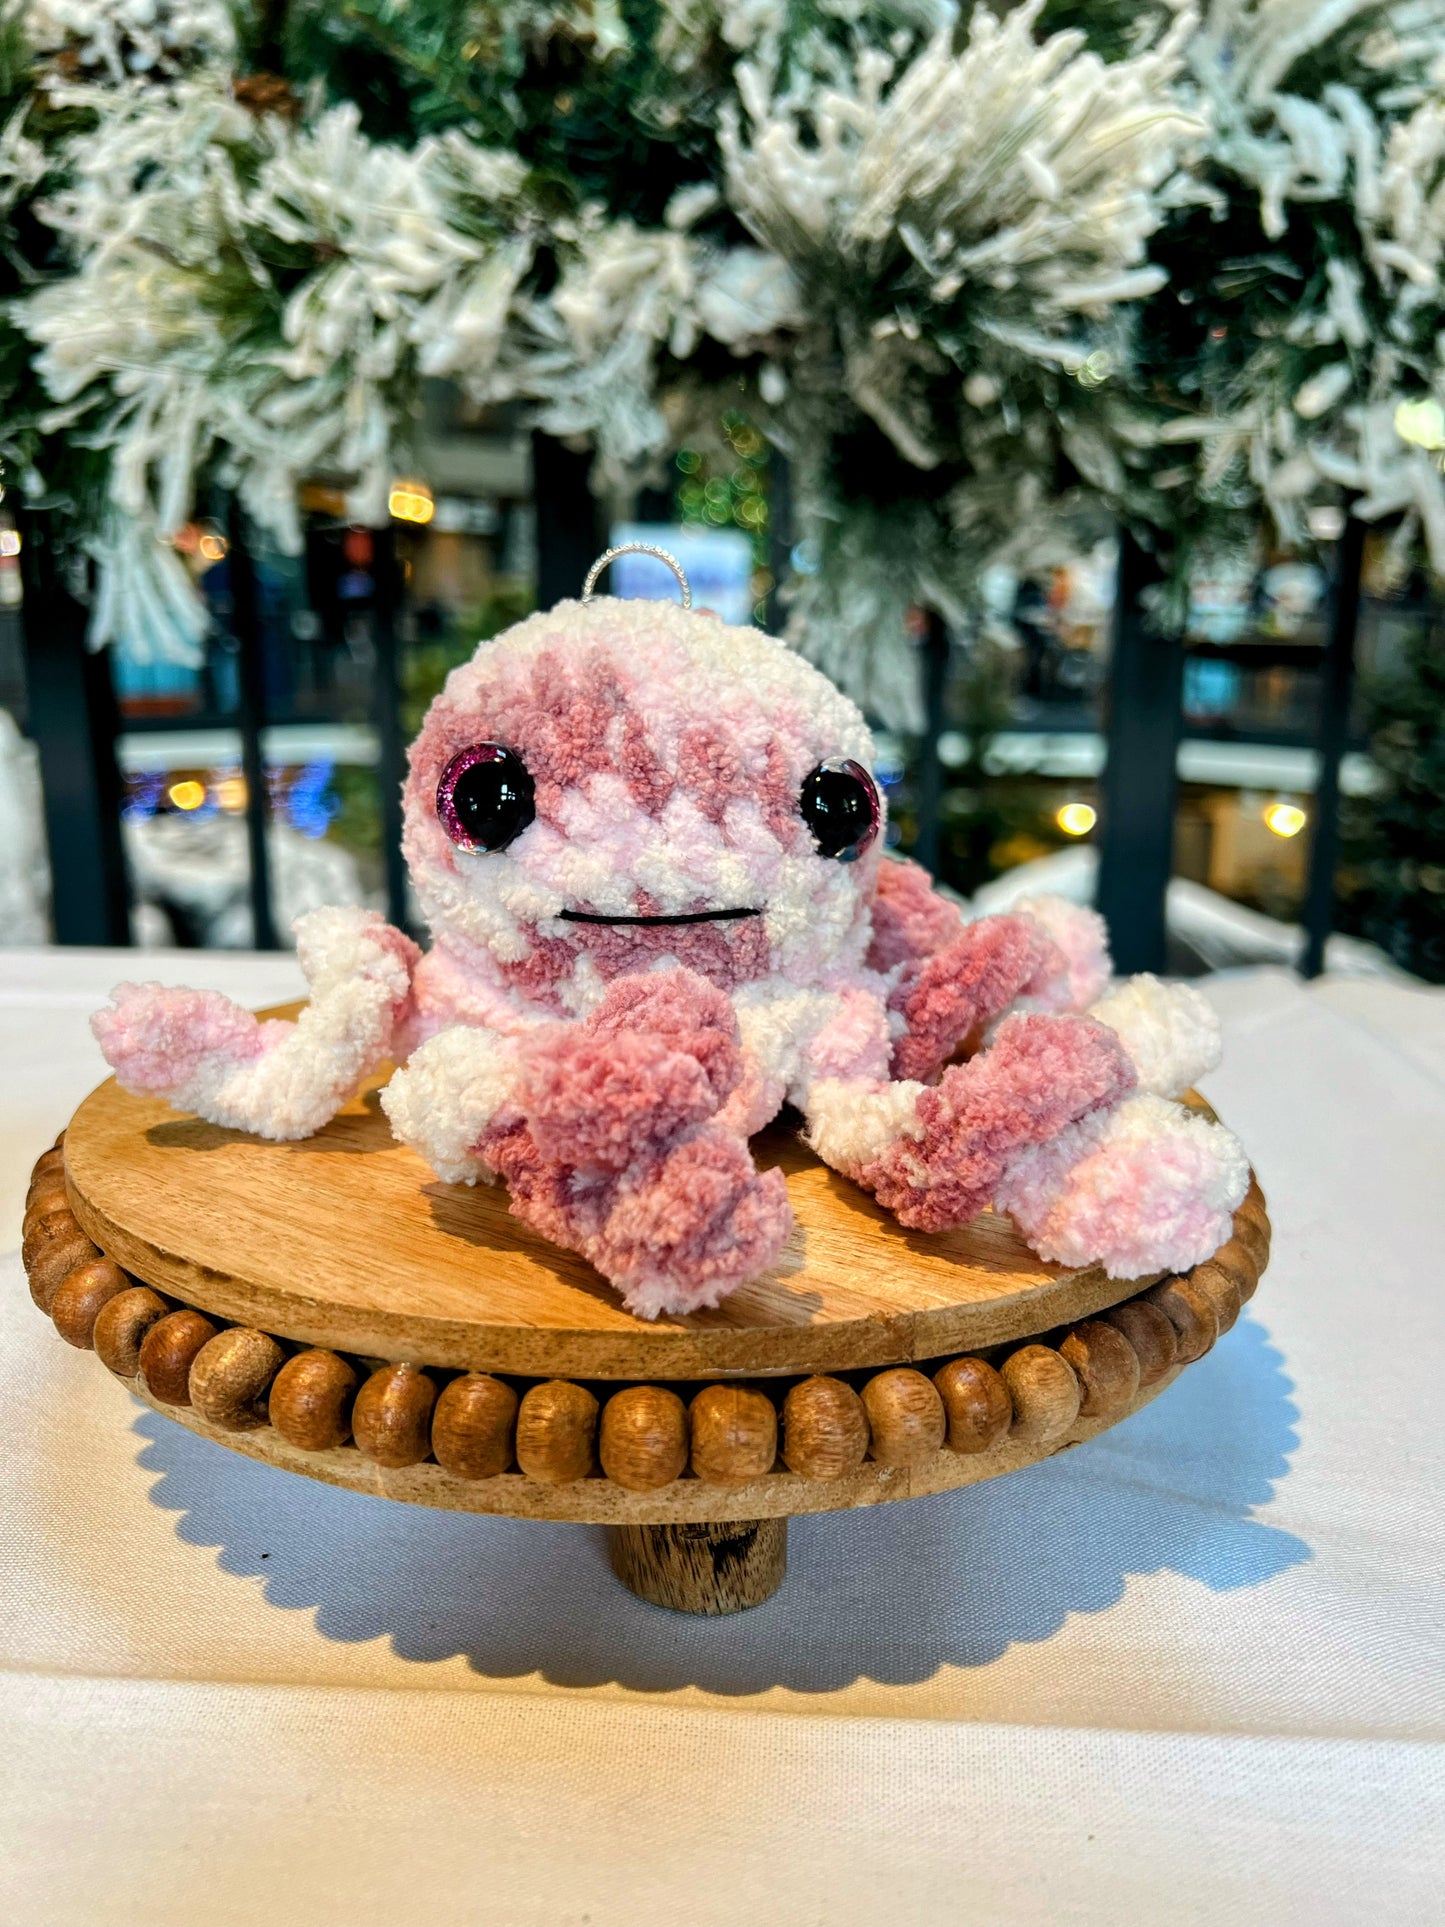 Stuffed Octopus Keychain - Crochet Knitted Amigurumi Toy (Different Colors Available)